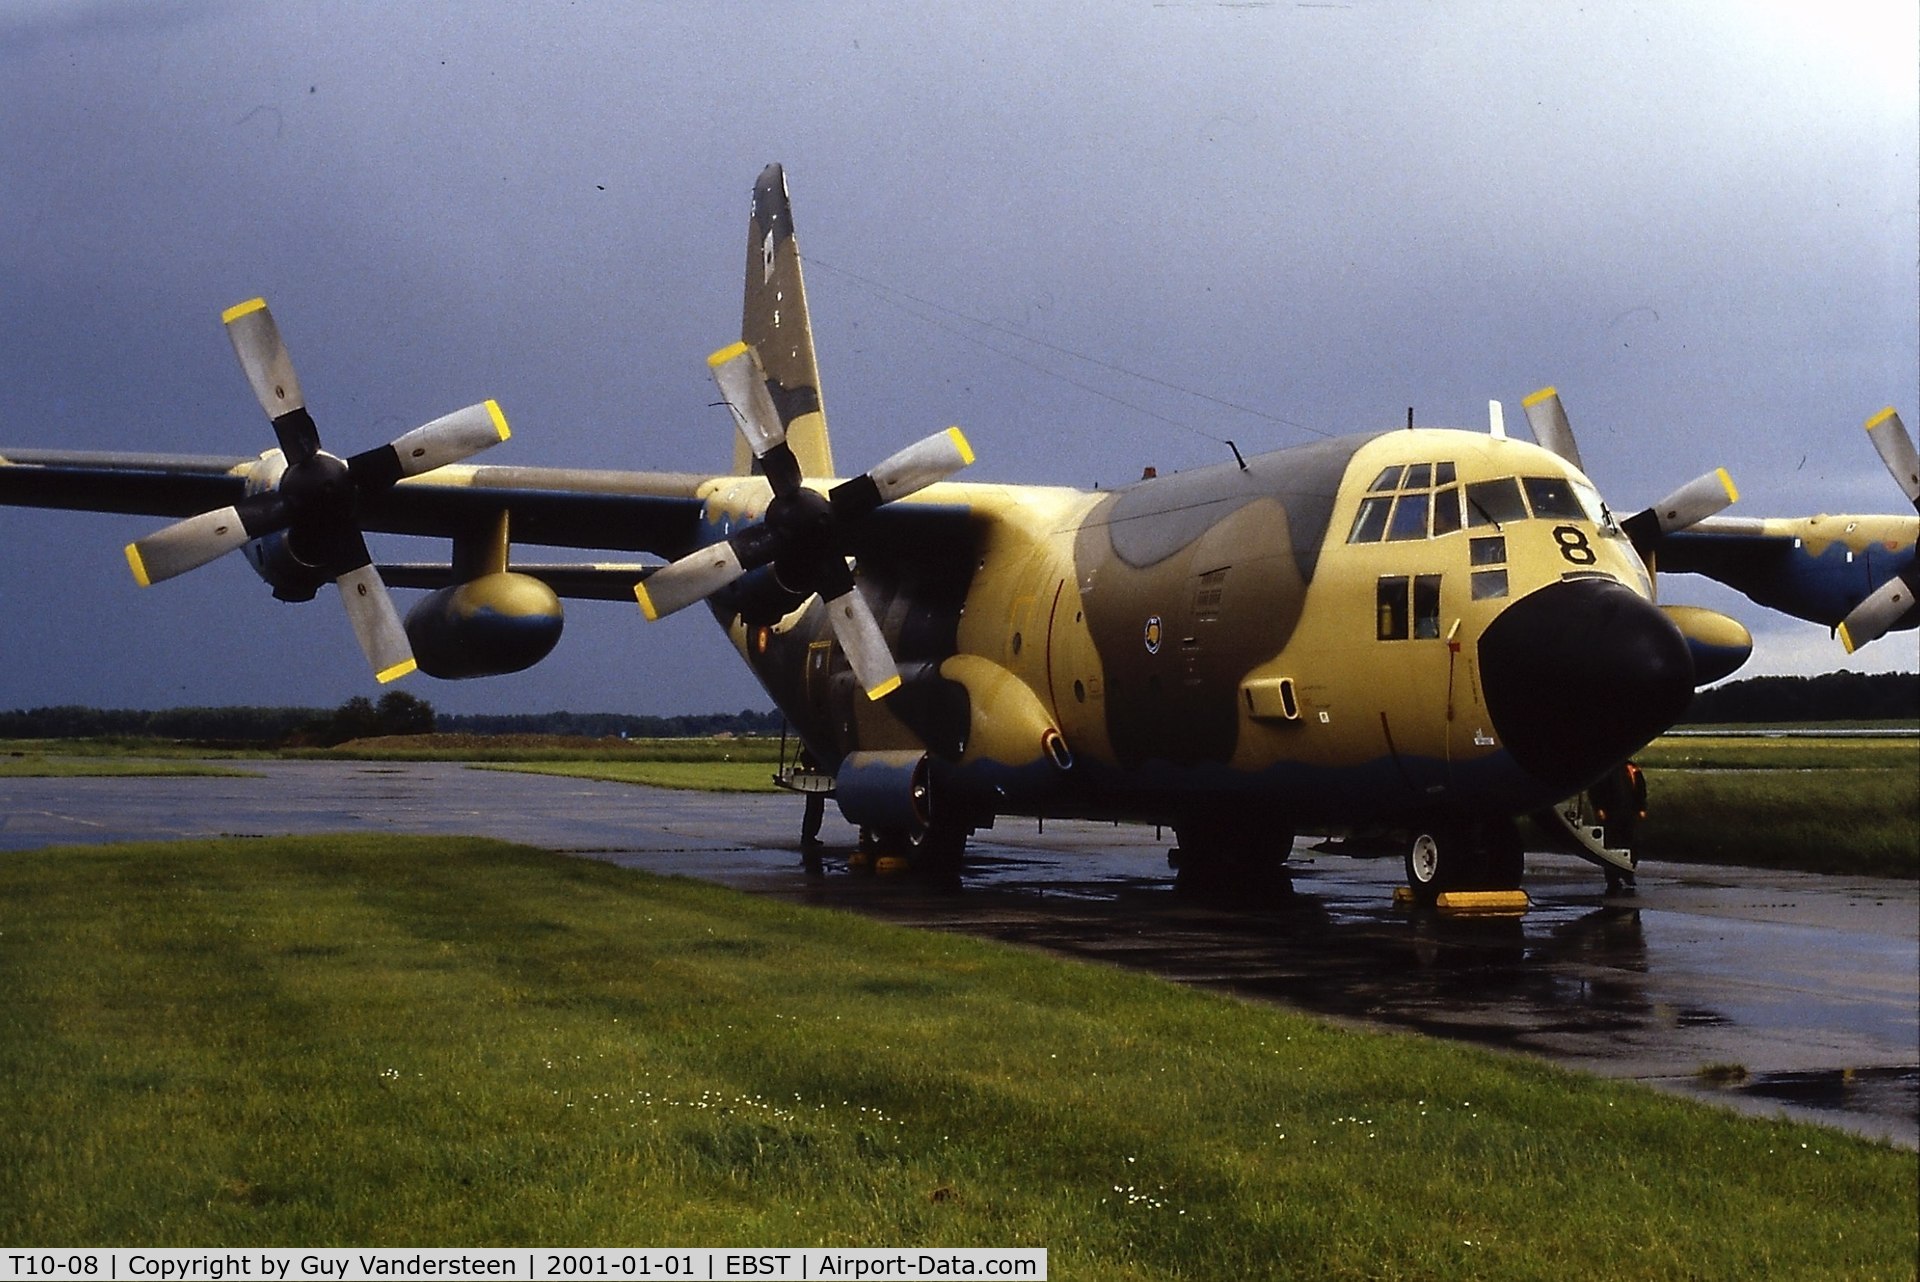 T10-08, 1979 Lockheed C-130H Hercules C/N 382-4835, Support aircraft Squadron exchange at EBST